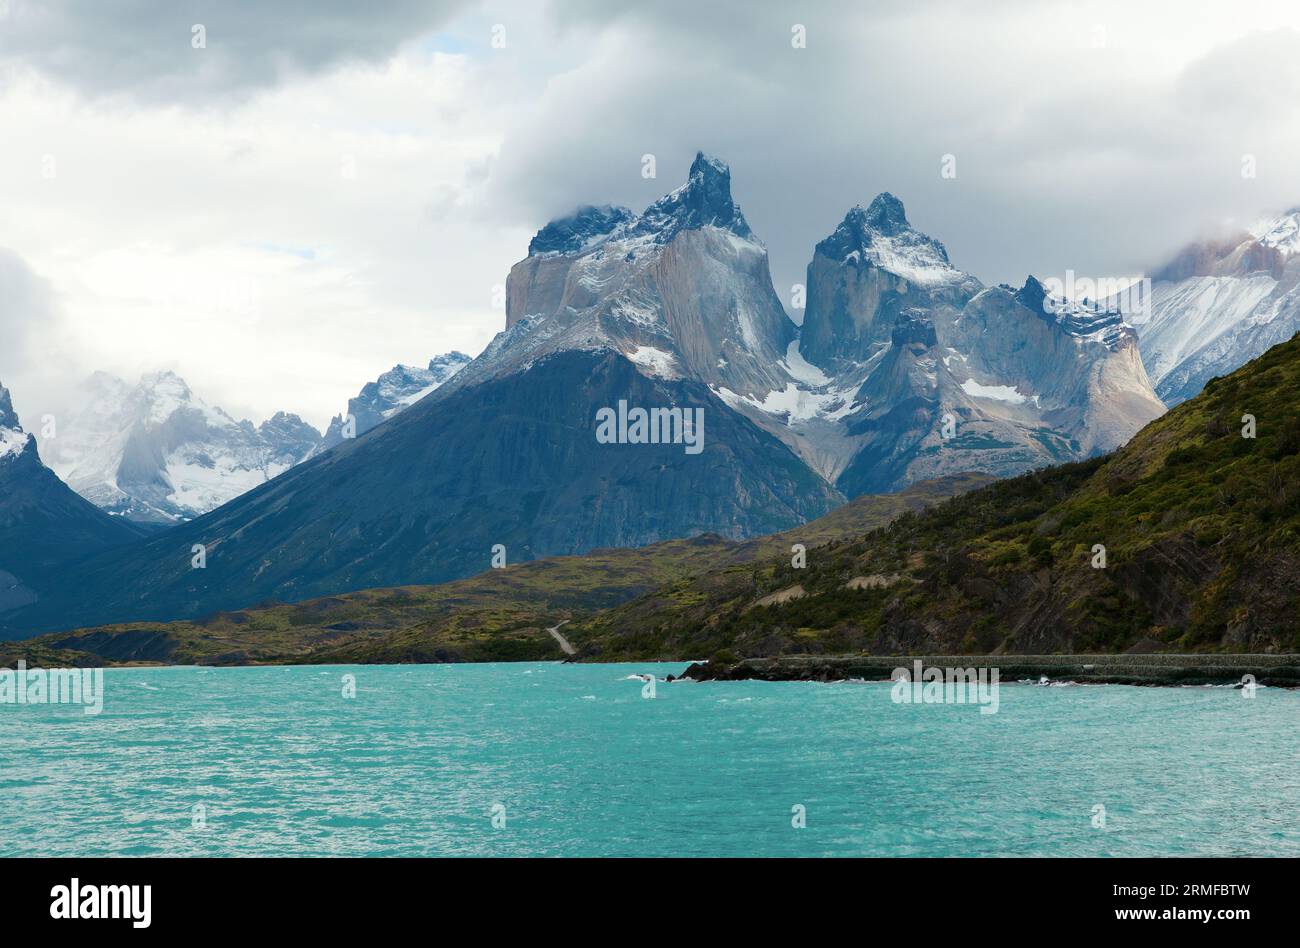 Scenic view of Cuernos del Paine mountains in Torres del Paine national park, Chile Stock Photo